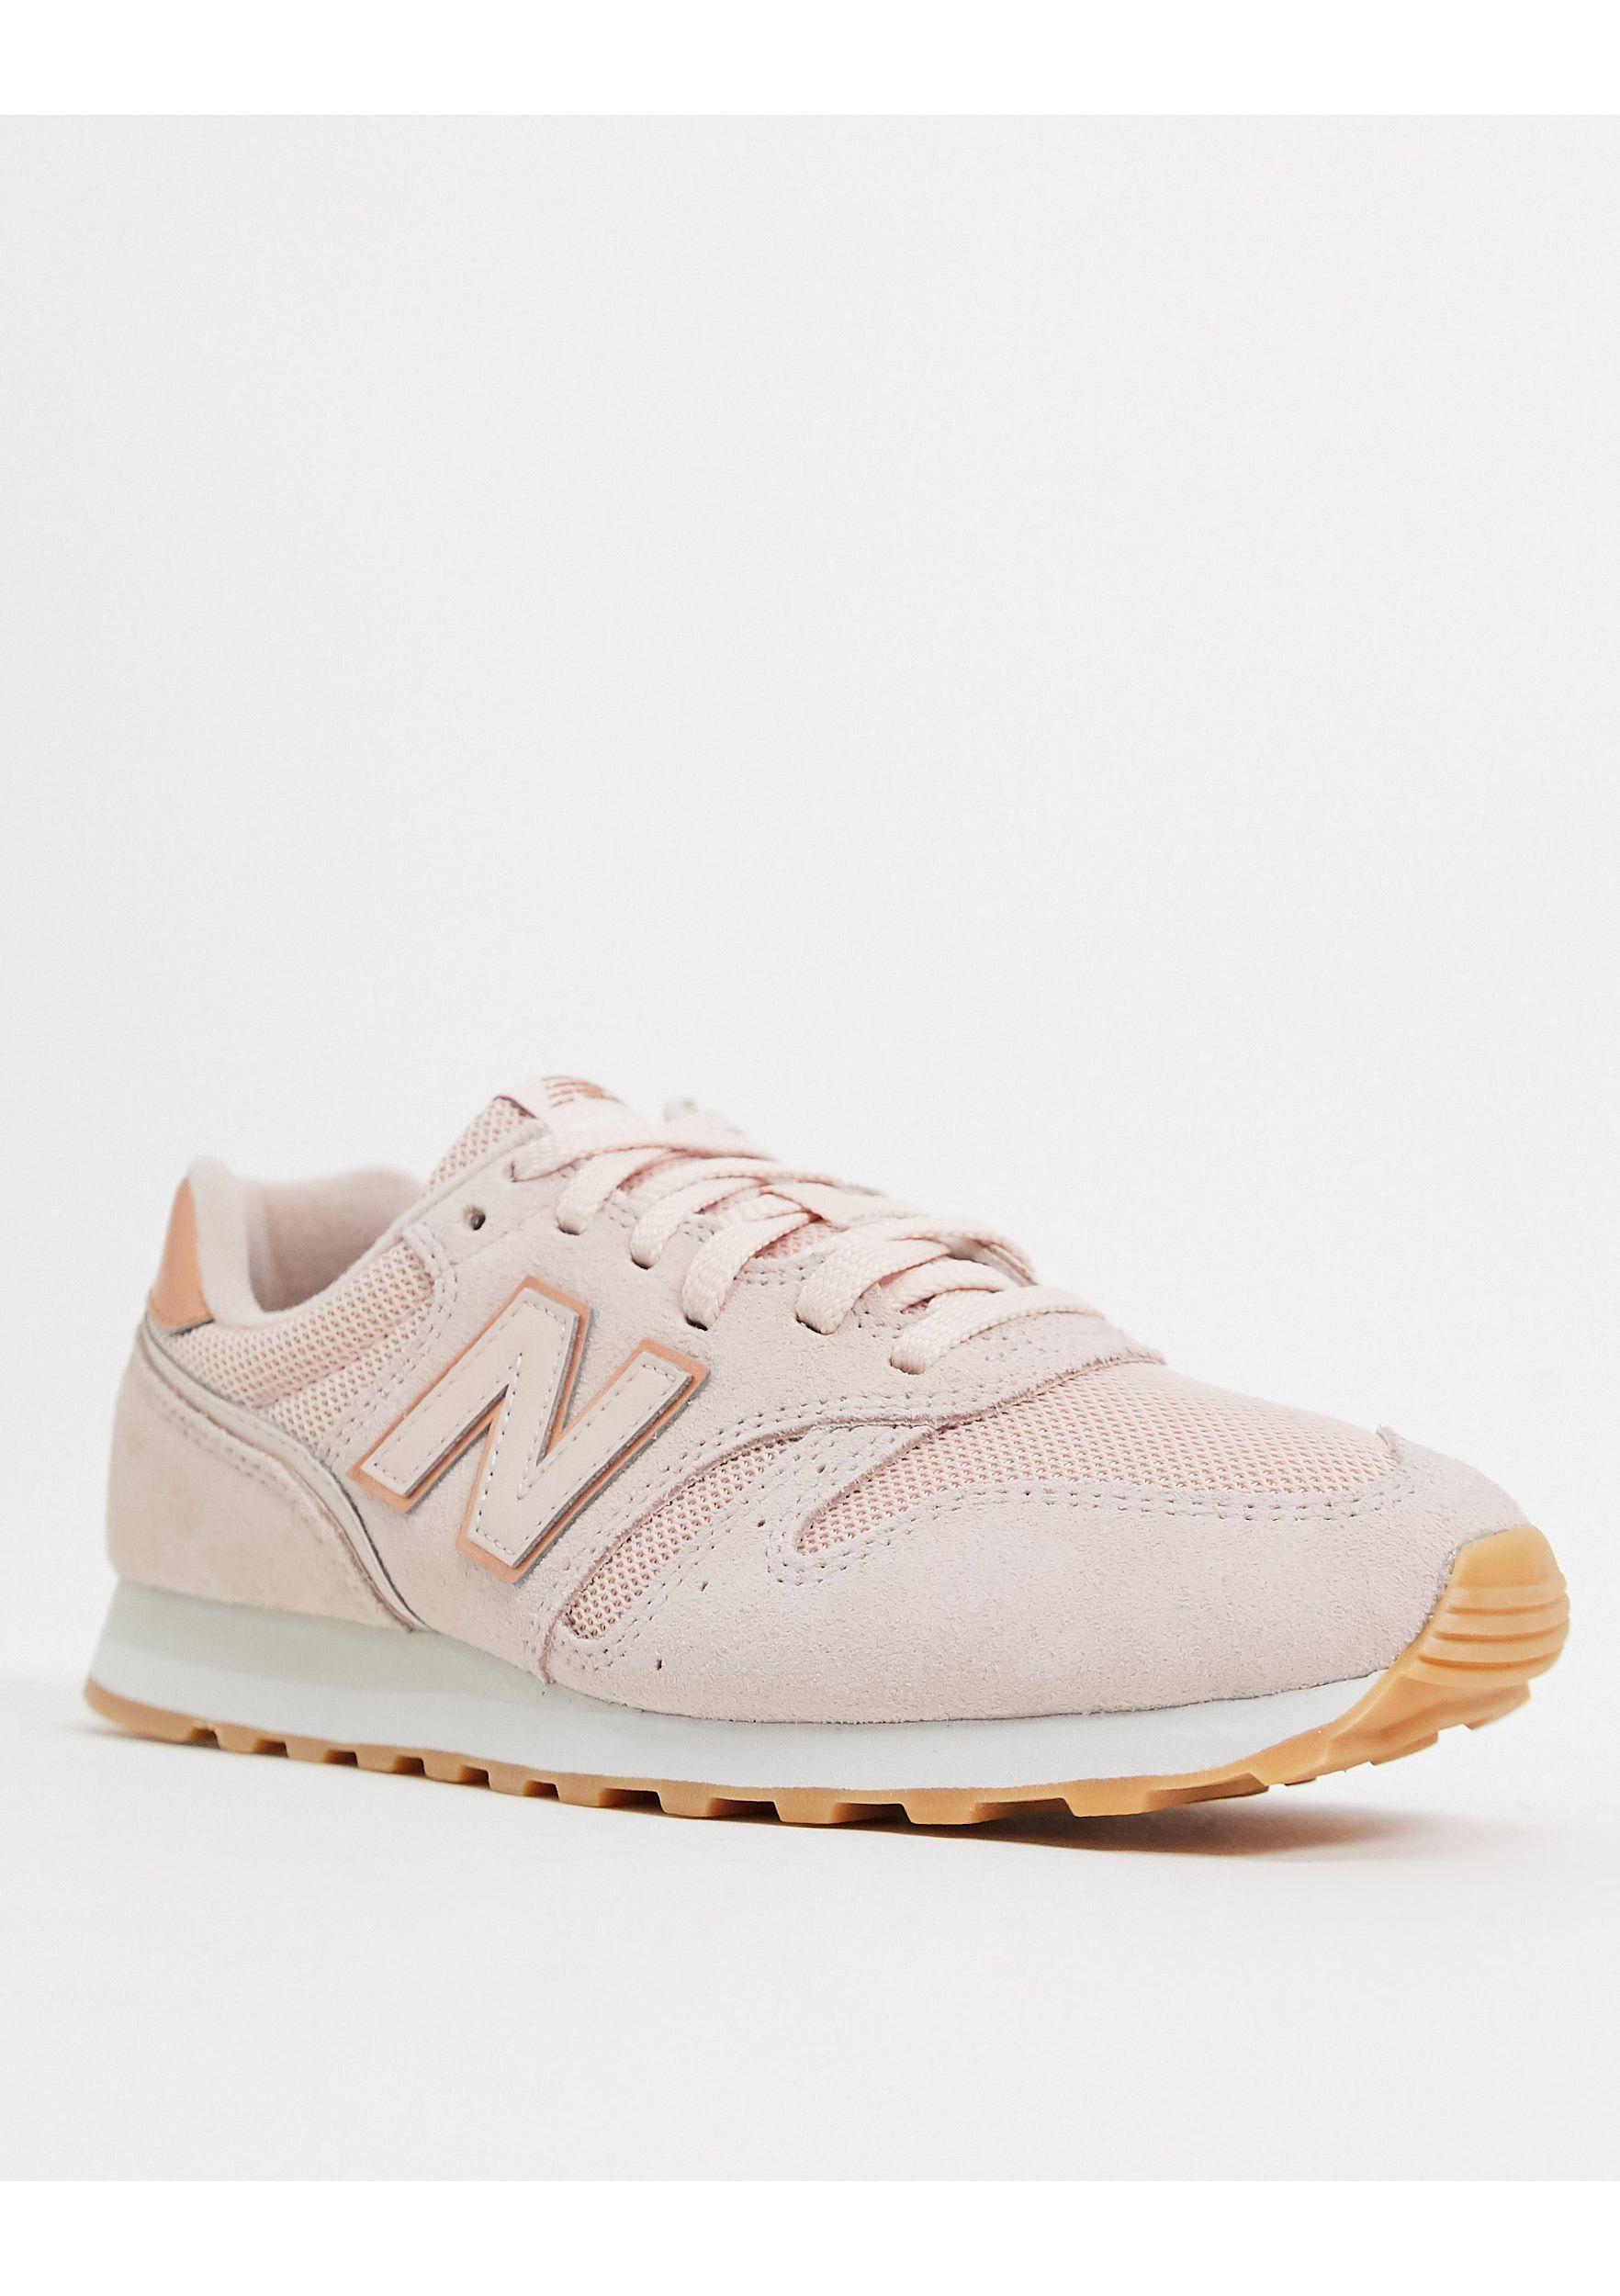 New Balance 373 Womens Pink Rose Gold Trainers